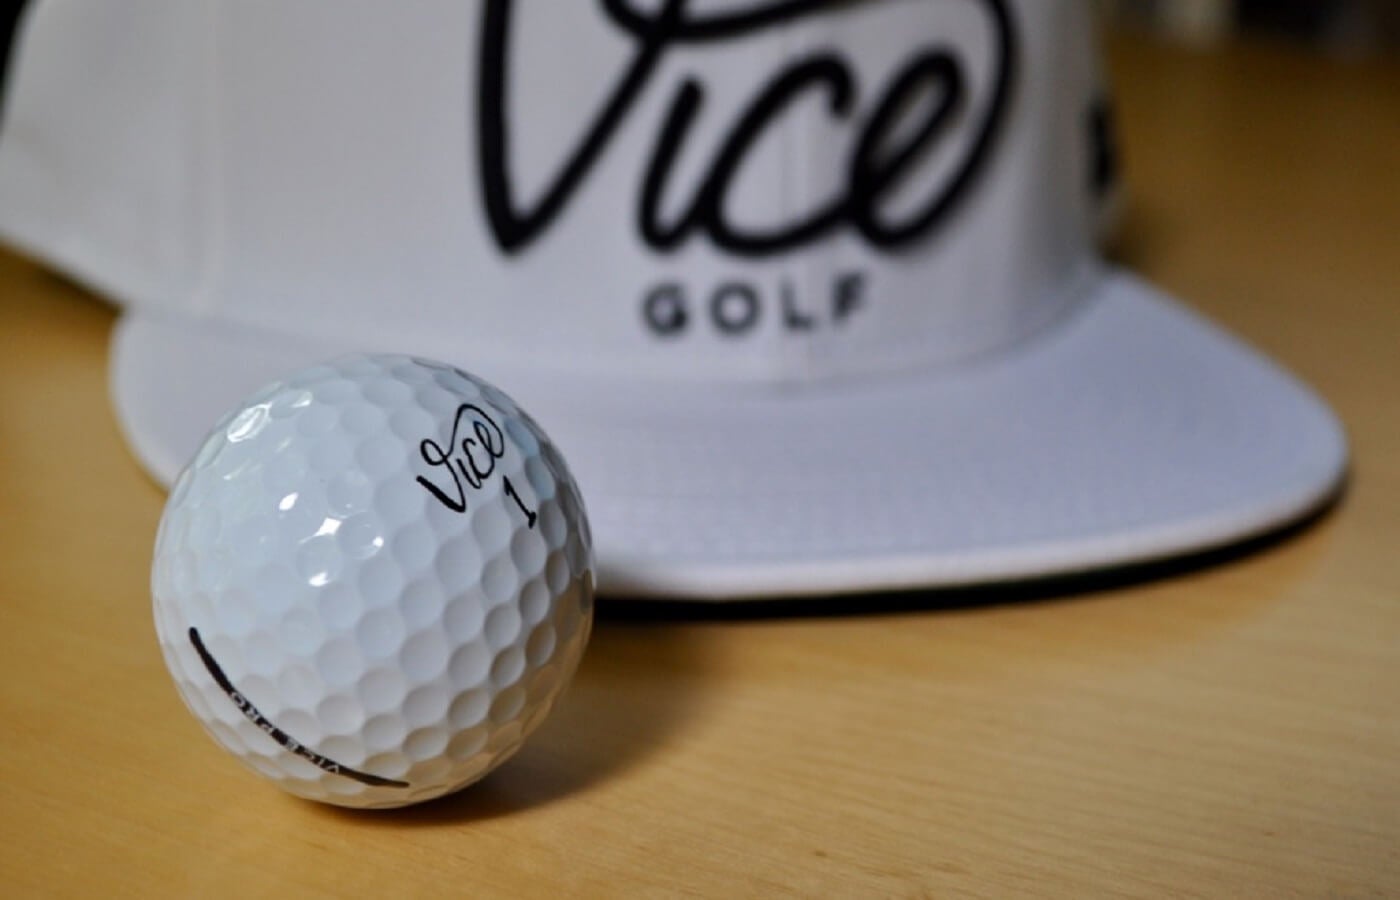 Top-Rated Vice Golf Balls for Unmatched Performance